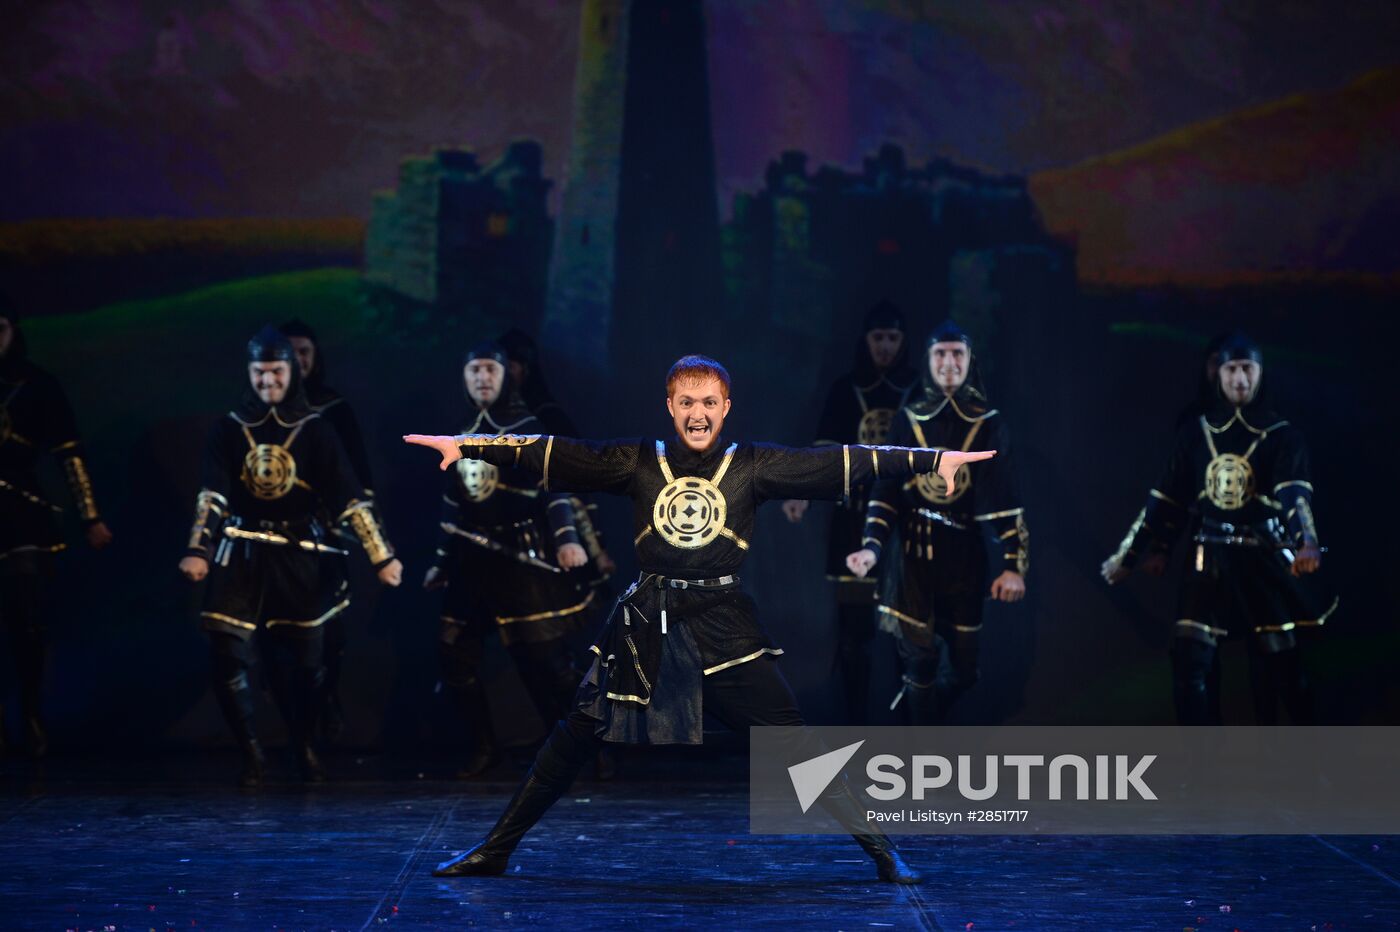 Concert to mark opening of ASEAN-Russia Culture Festival